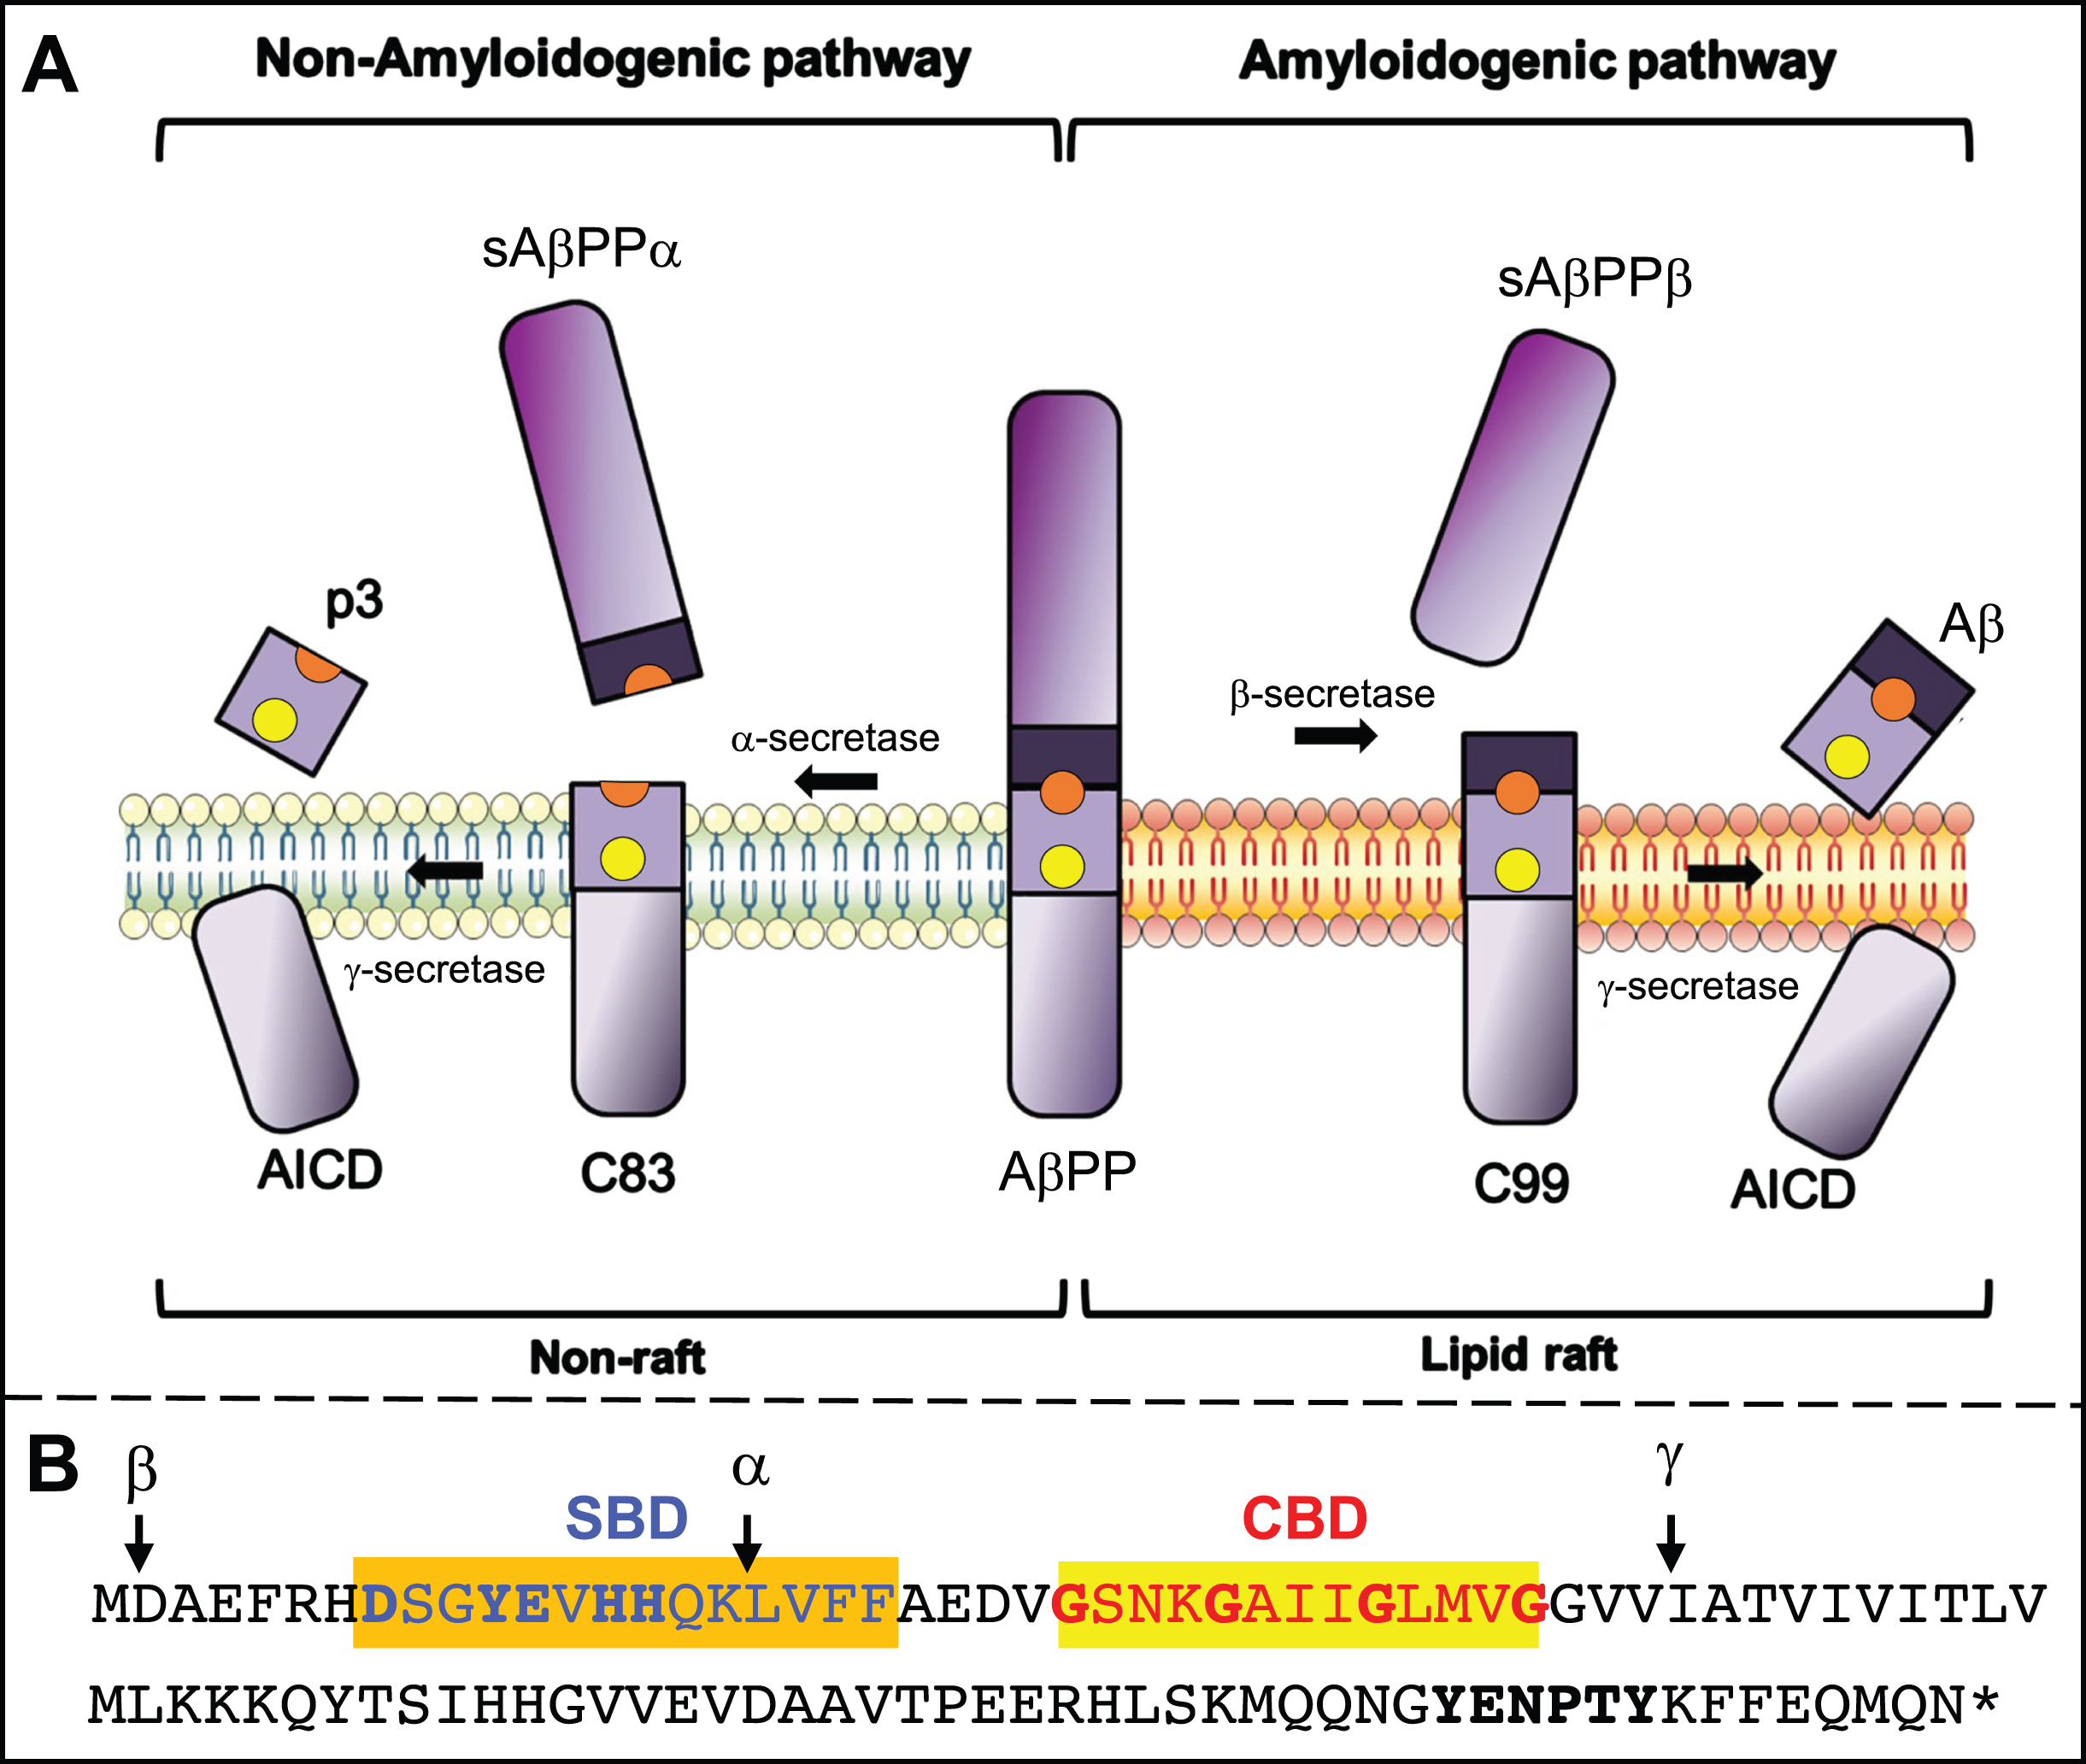 AβPP processing. A) Processing intermediates. Yellow dot, cholesterol-binding domain (CBD); orange dot, sphingolipid-binding domain (SBD). Adapted from [3], with permission (doi.org/10.1016/j.nbd.2020.105062). B) Human C99 sequence; important residues for SBD [149] and CBD (based on [117] and [118]) binding, and the YENPTY motif, in bold. Cleavage sites for α-, β-, and γ-secretase are indicated (arrows). See text for details.